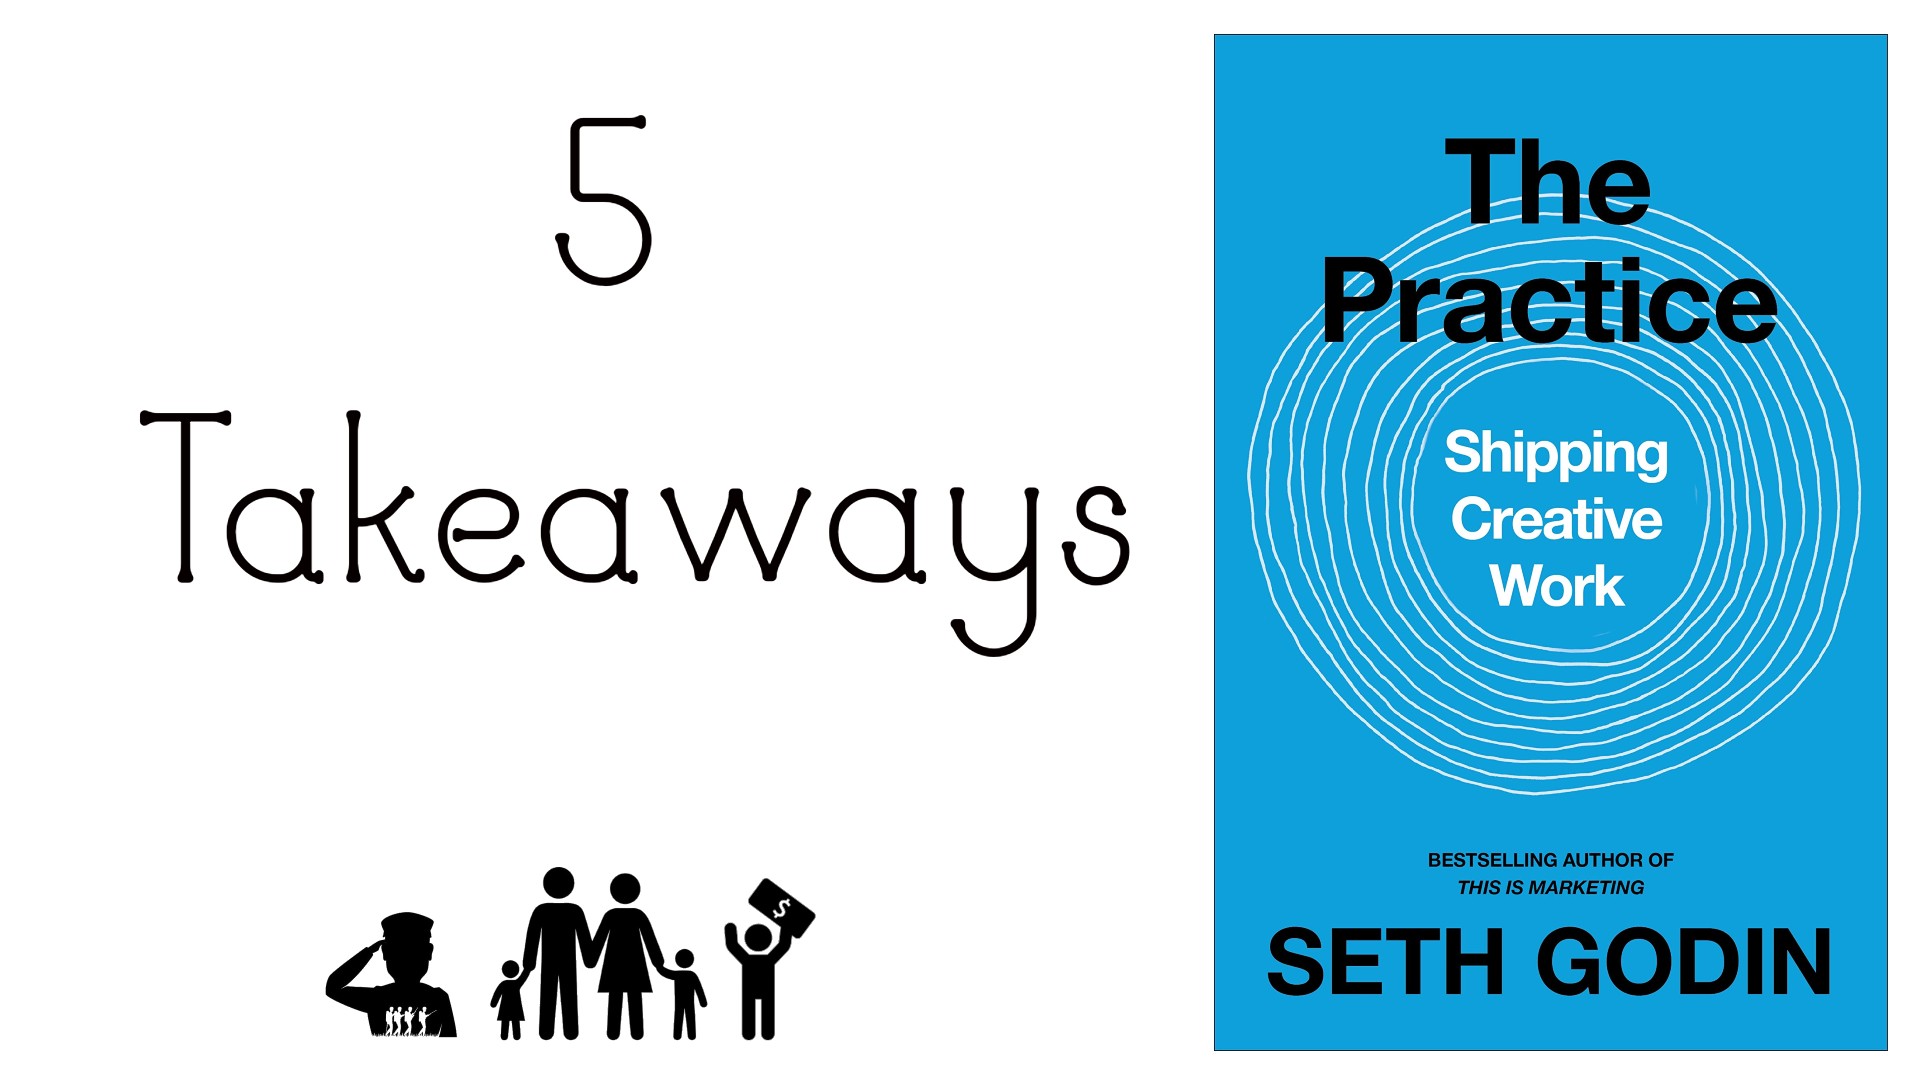 5 Takeaways from “The Practice”